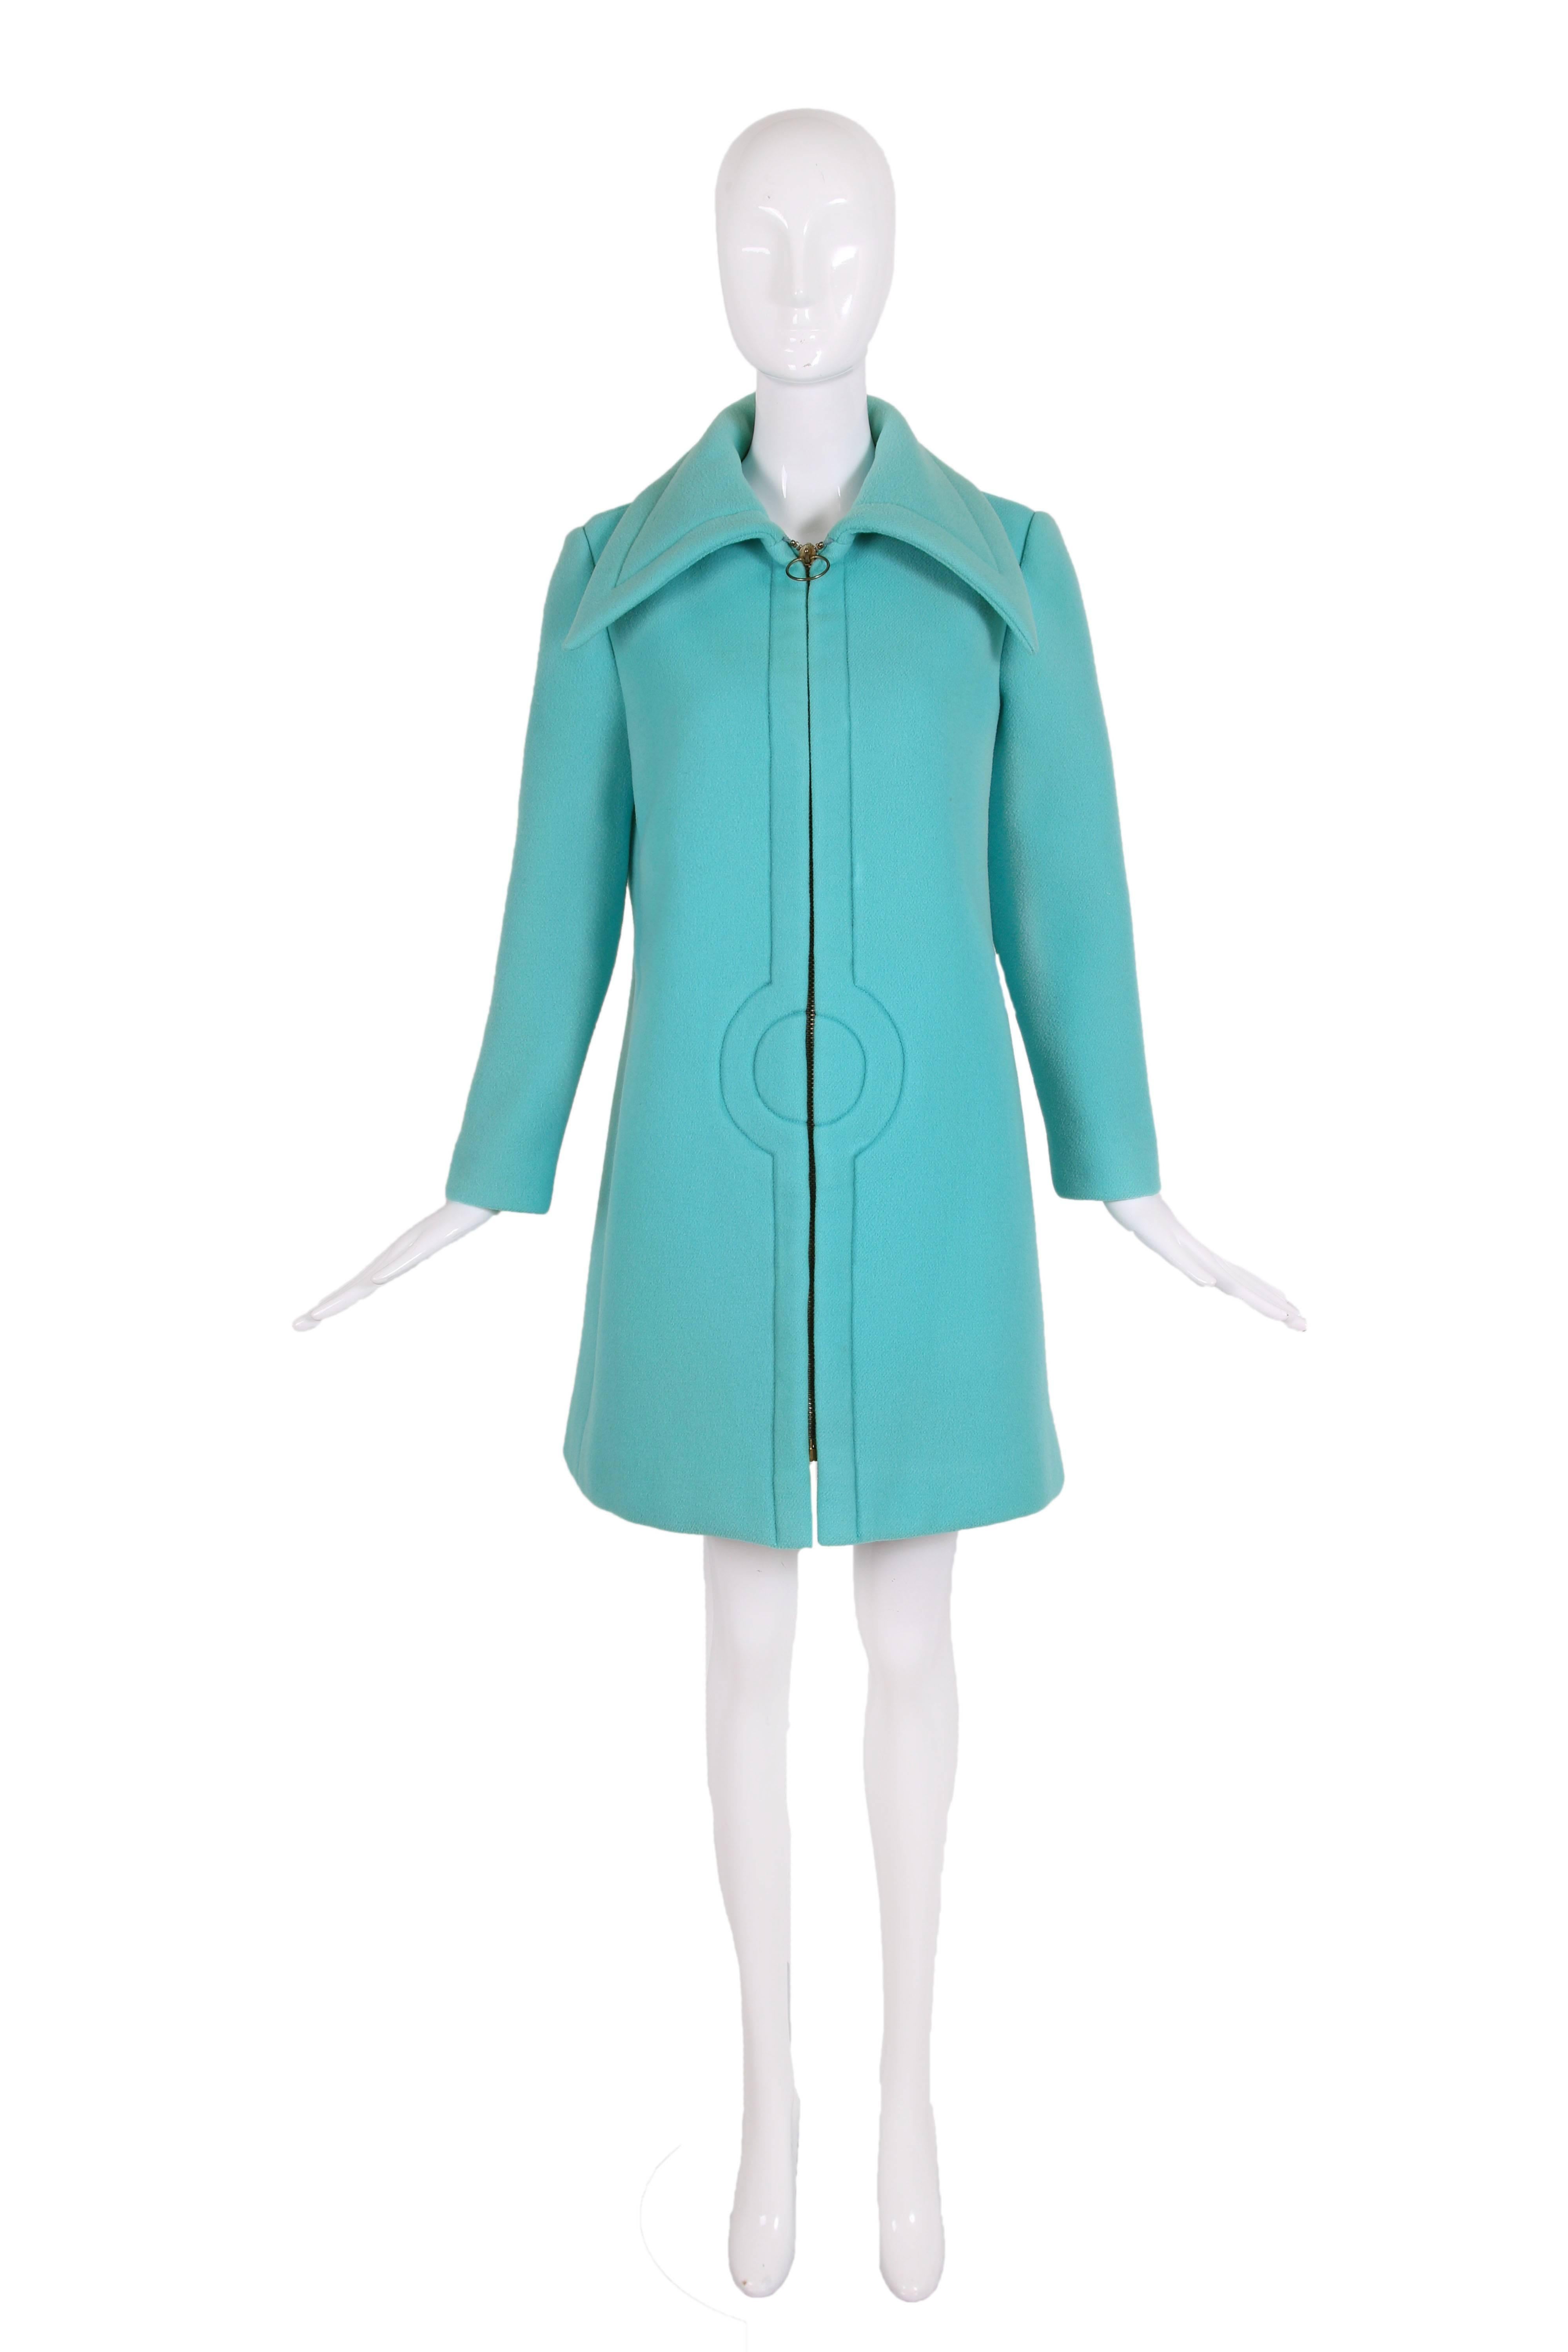 Late 1960's/early 1970's Pierre Cardin aqua blue melton wool coat with oversized collar and classic Cardin stitched circle design motif at center front near waist. Oversized metal zipper closure at center front with oversized circular metal zipper